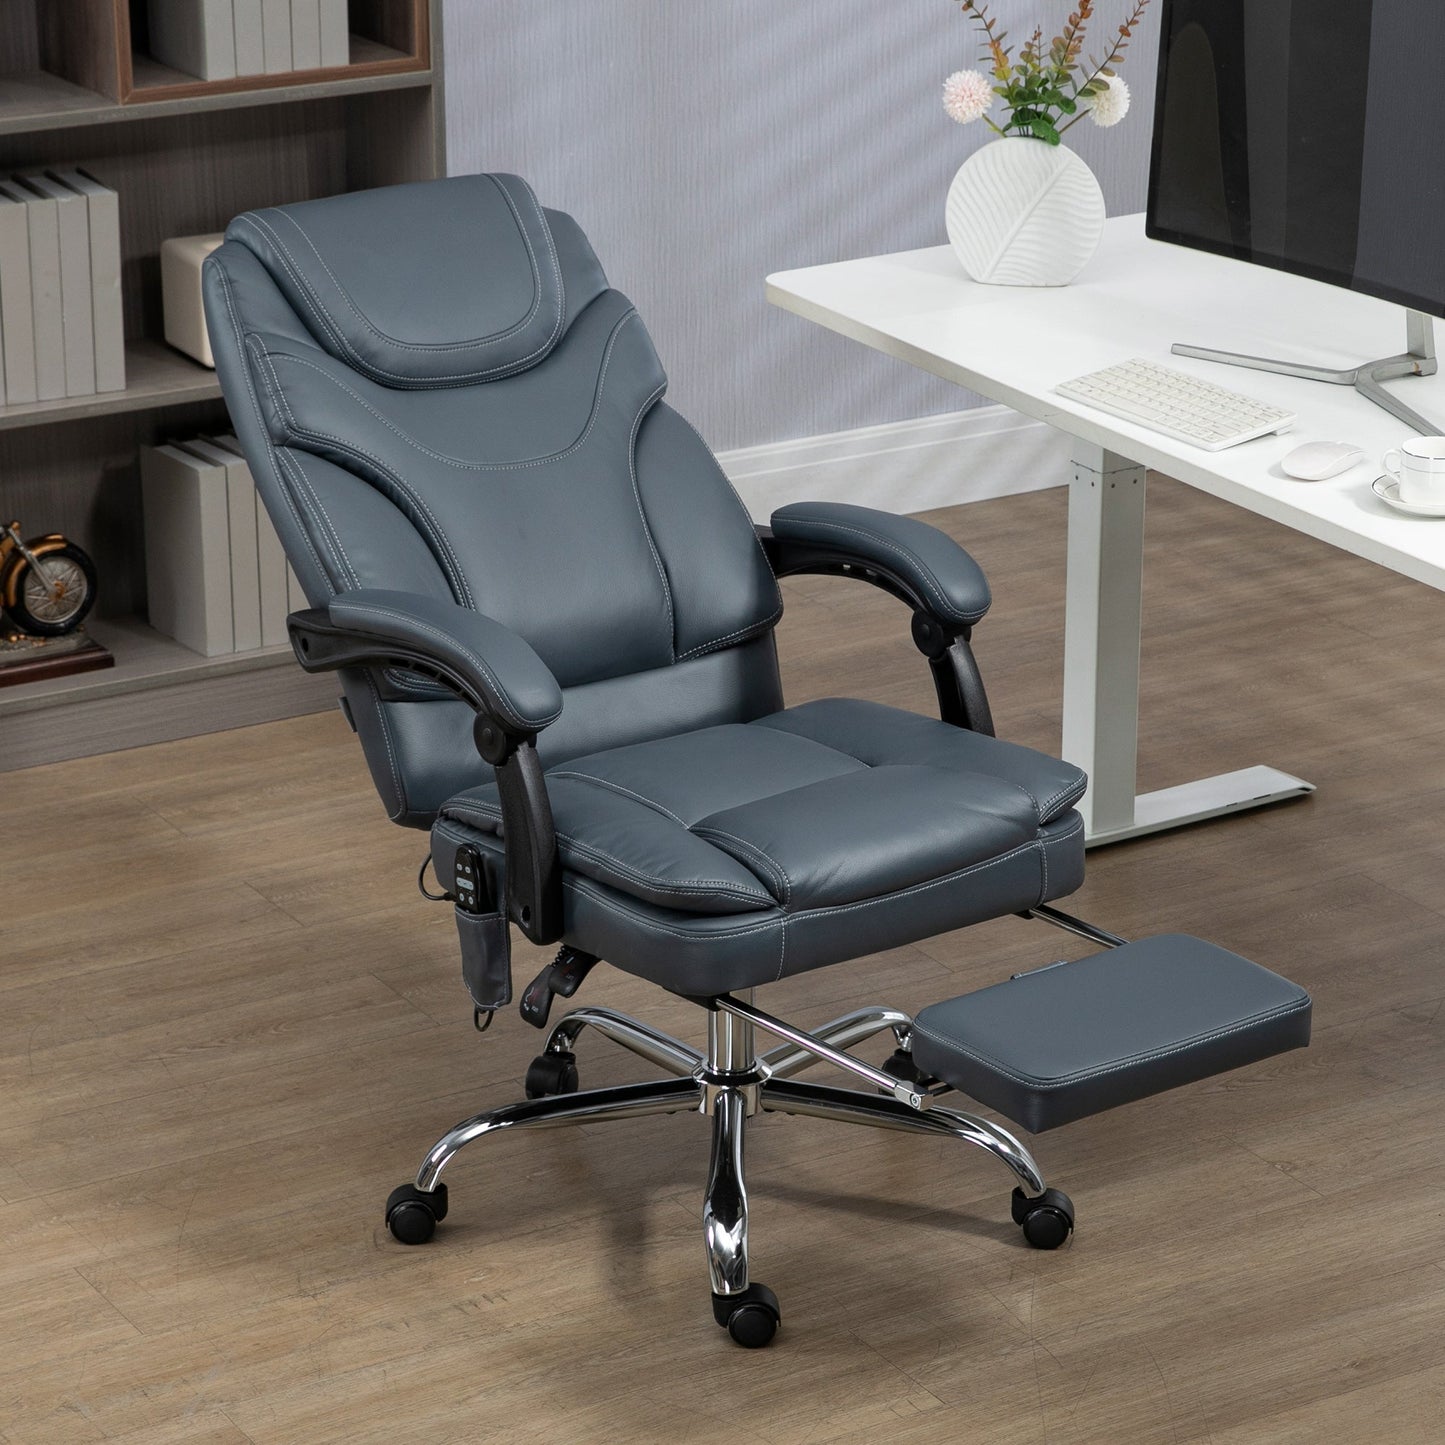 6 Point Vibration Massage Office Chair, PU Leather Heated Reclining Computer Chair with Footrest, Grey at Gallery Canada